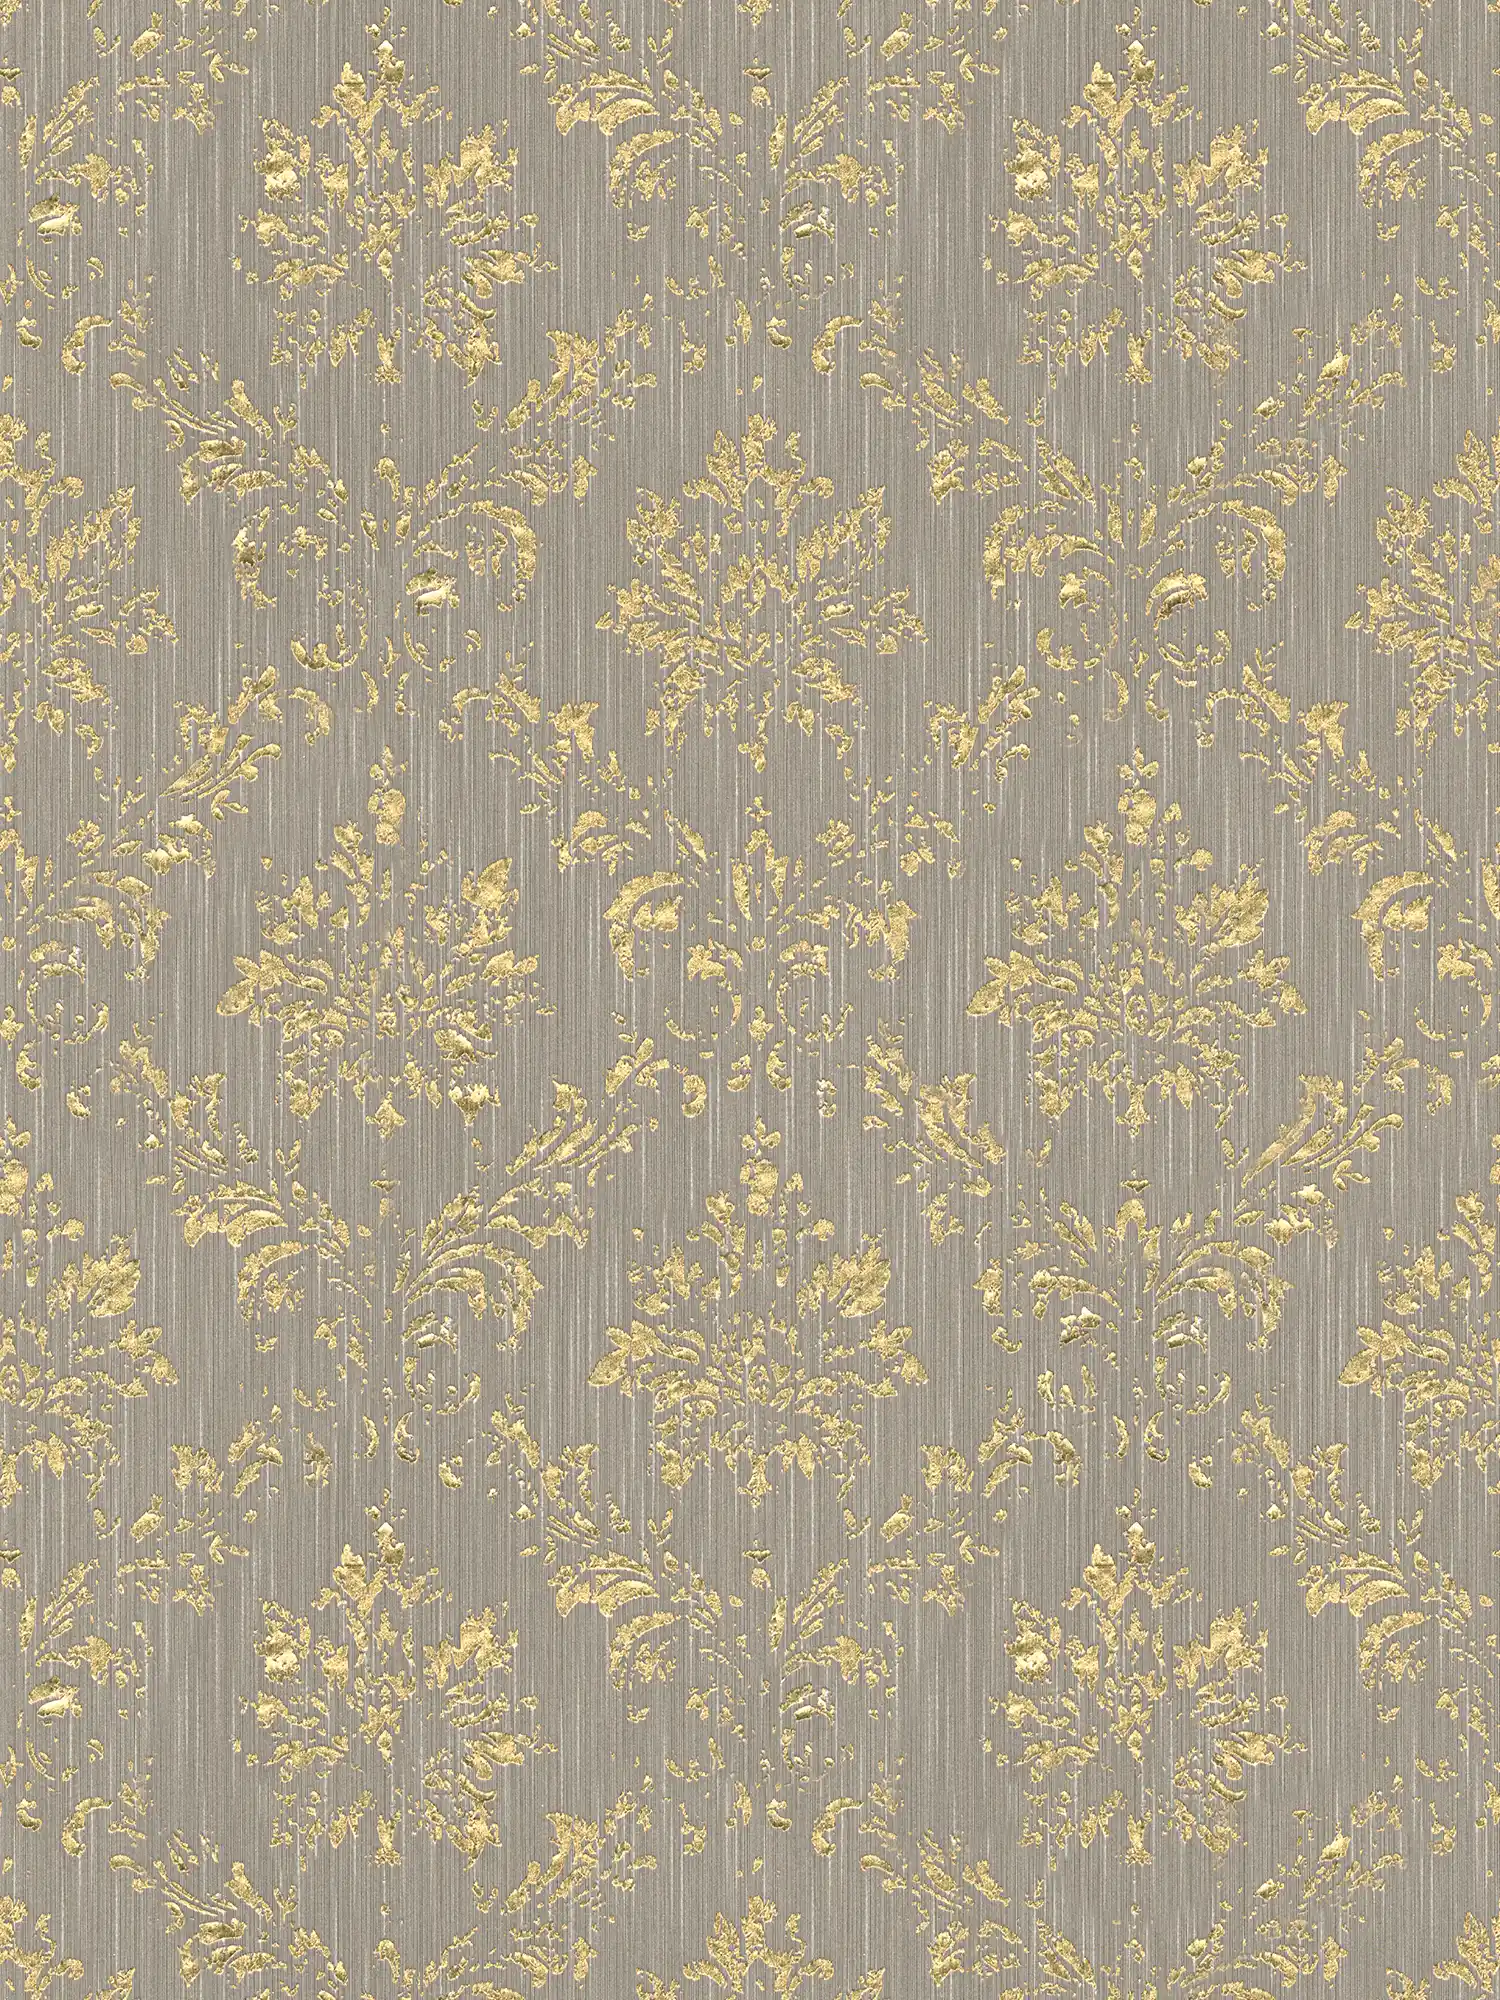         Wallpaper with gold ornaments in used look - beige, gold
    